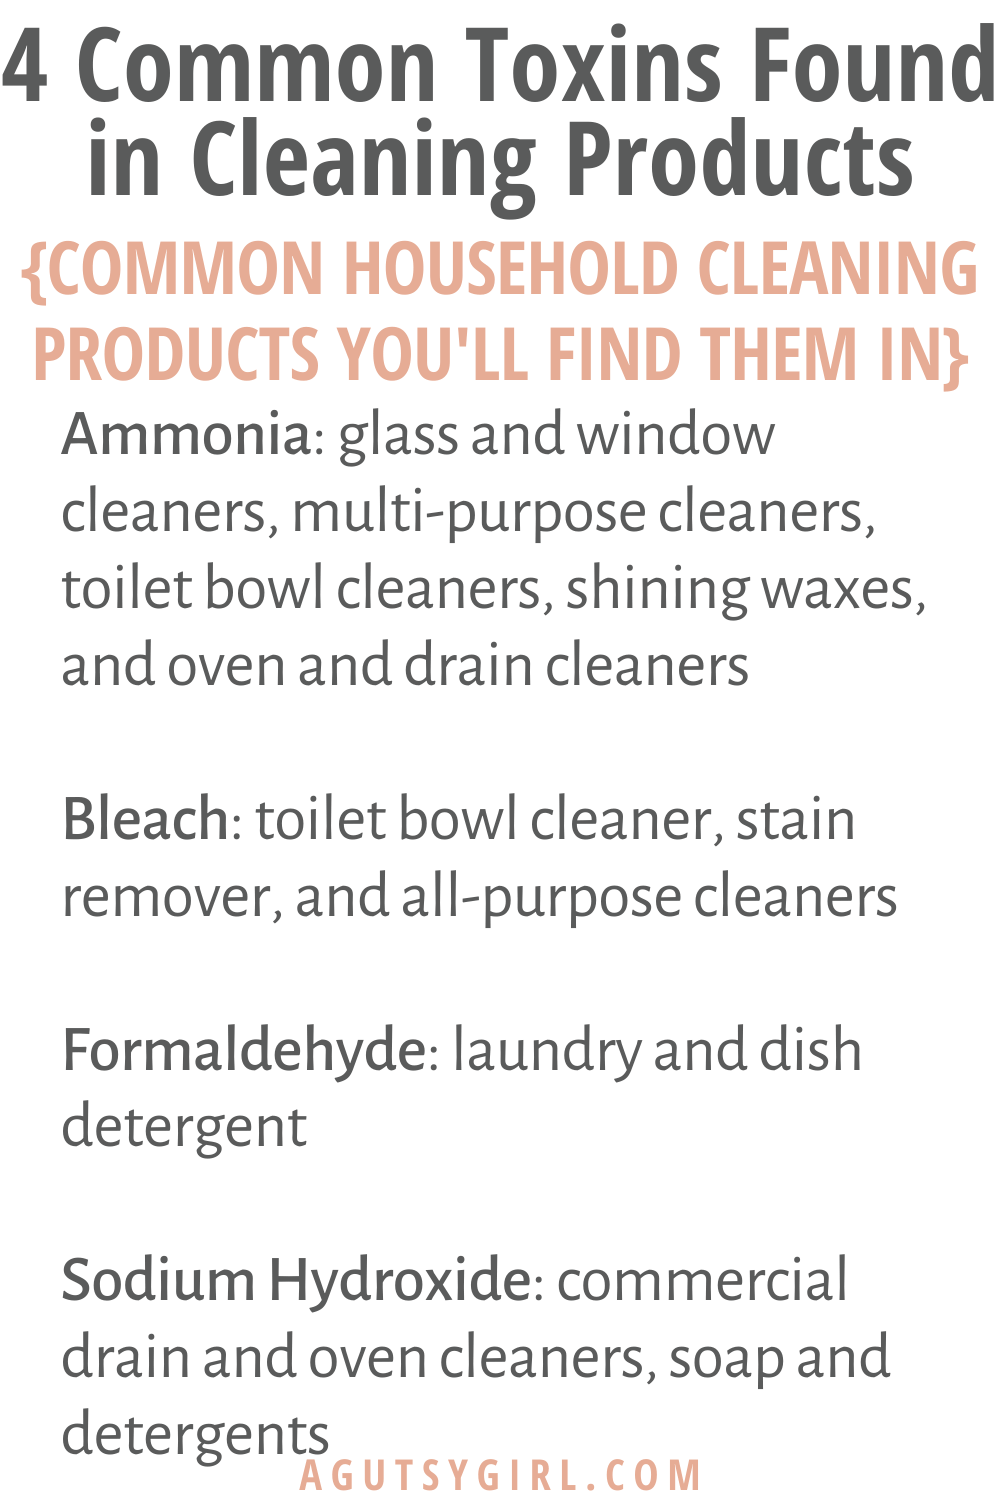 4 Common Toxins Found in Cleaning Products list agutsygirl.com #cleaningproducts #guthealth #toxins #chemicals